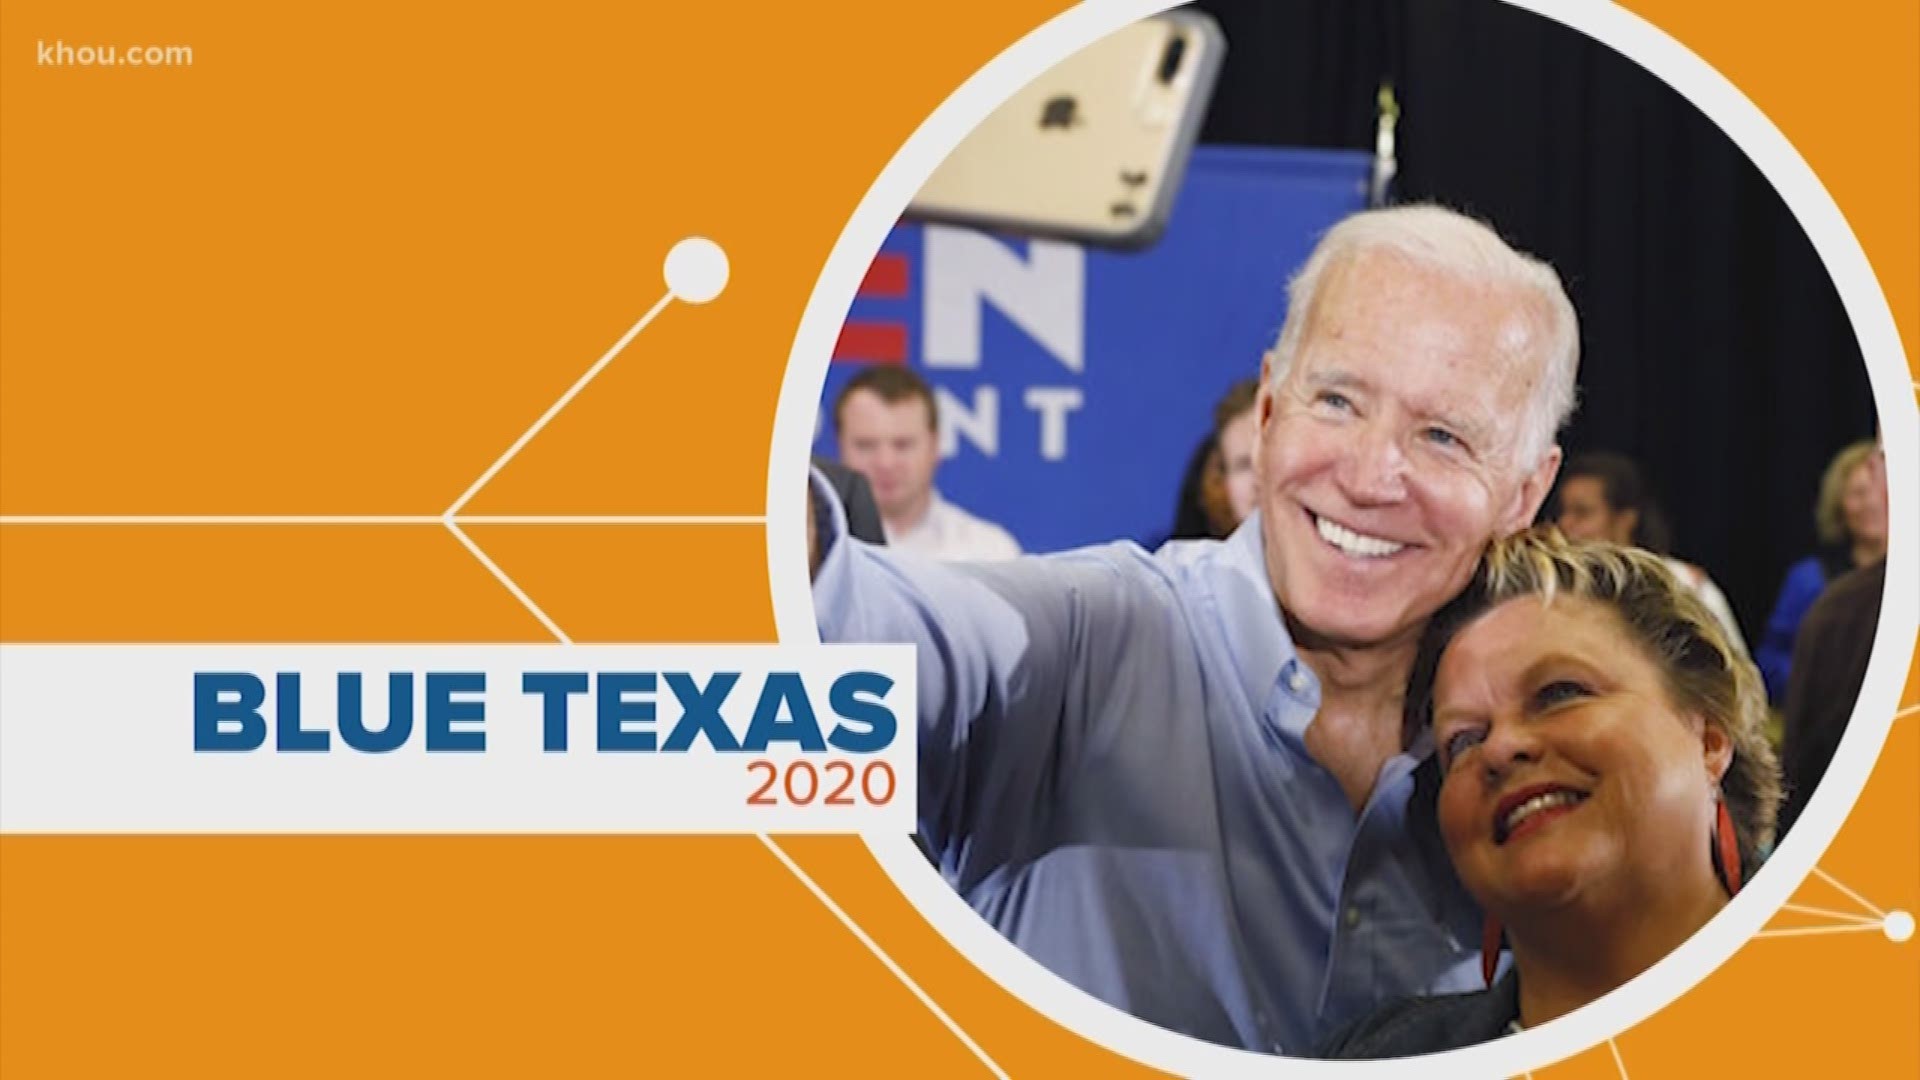 We've heard it before, reliably red Texas is slowly turning blue. But could it happen sooner than later? Some recent polls are suggesting that Texas could turn in 2020.